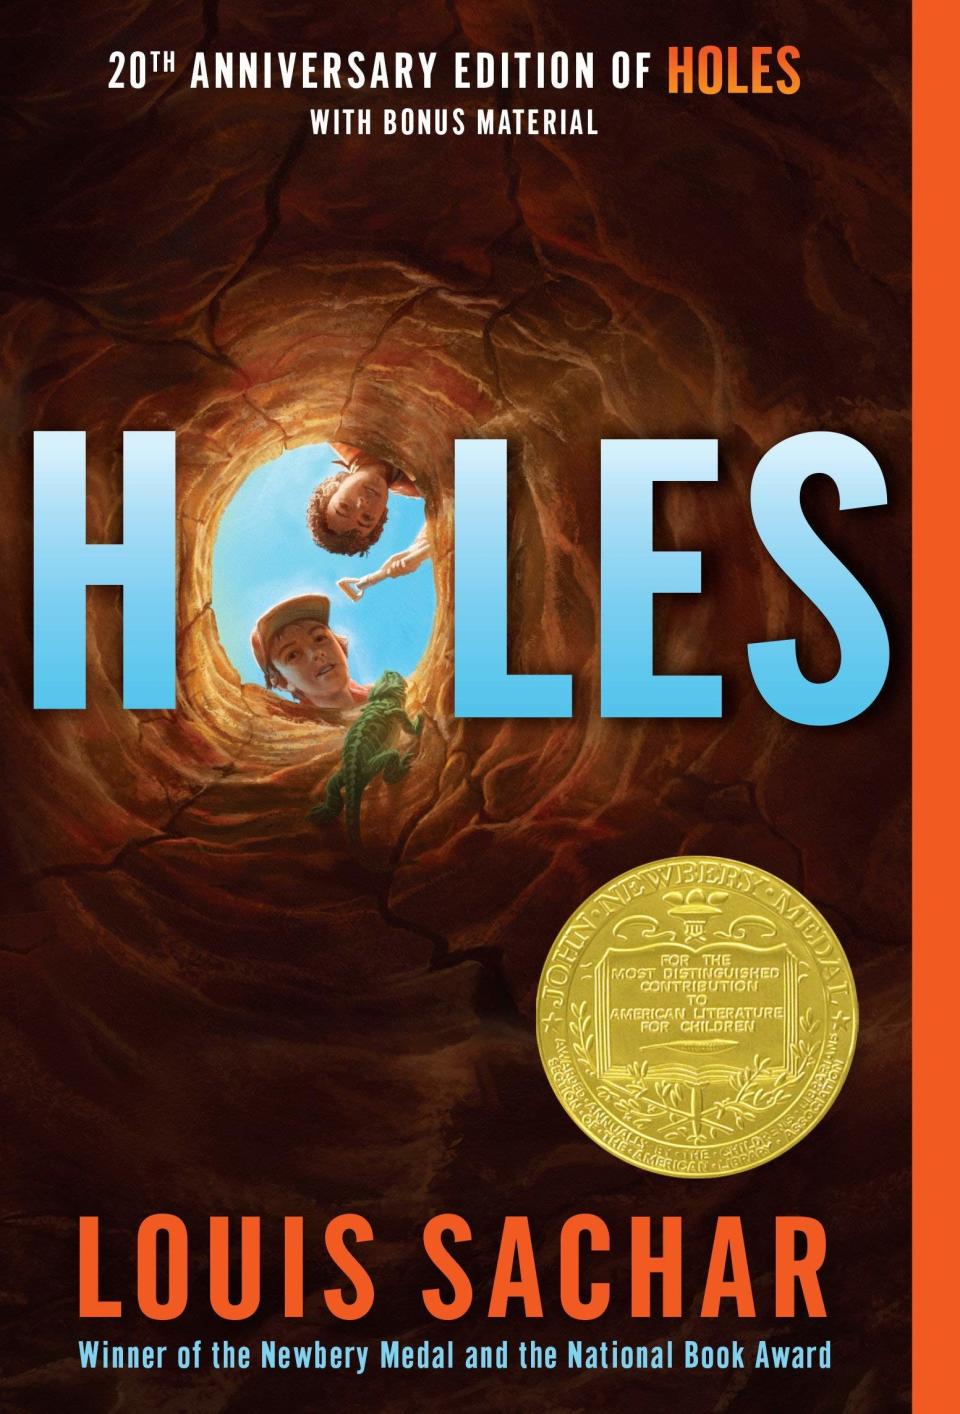 The cover of "Holes" by Louis Sachar.